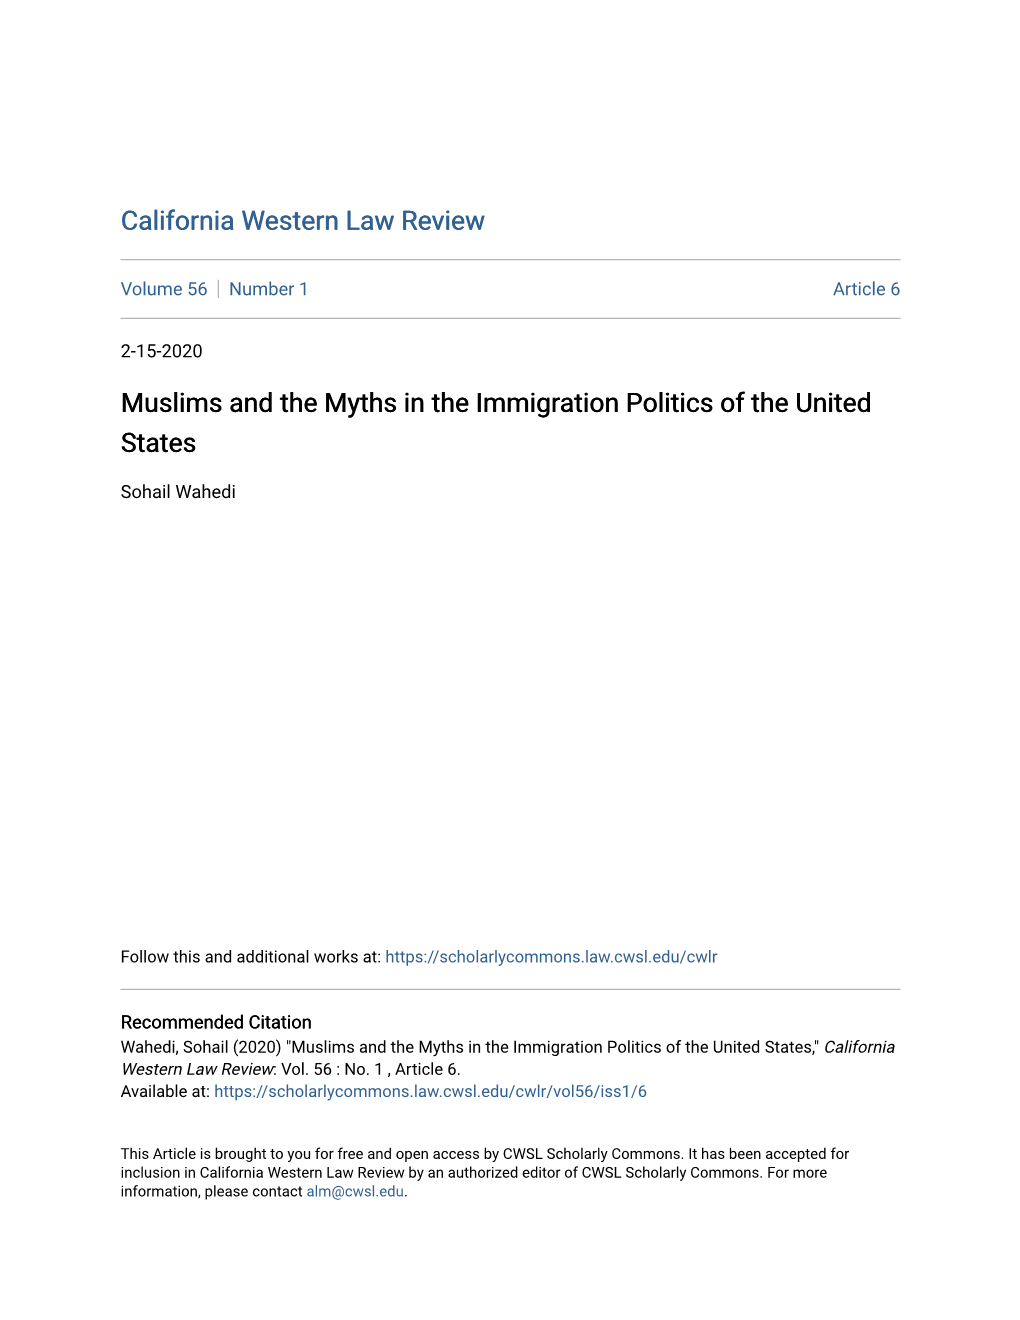 Muslims and the Myths in the Immigration Politics of the United States